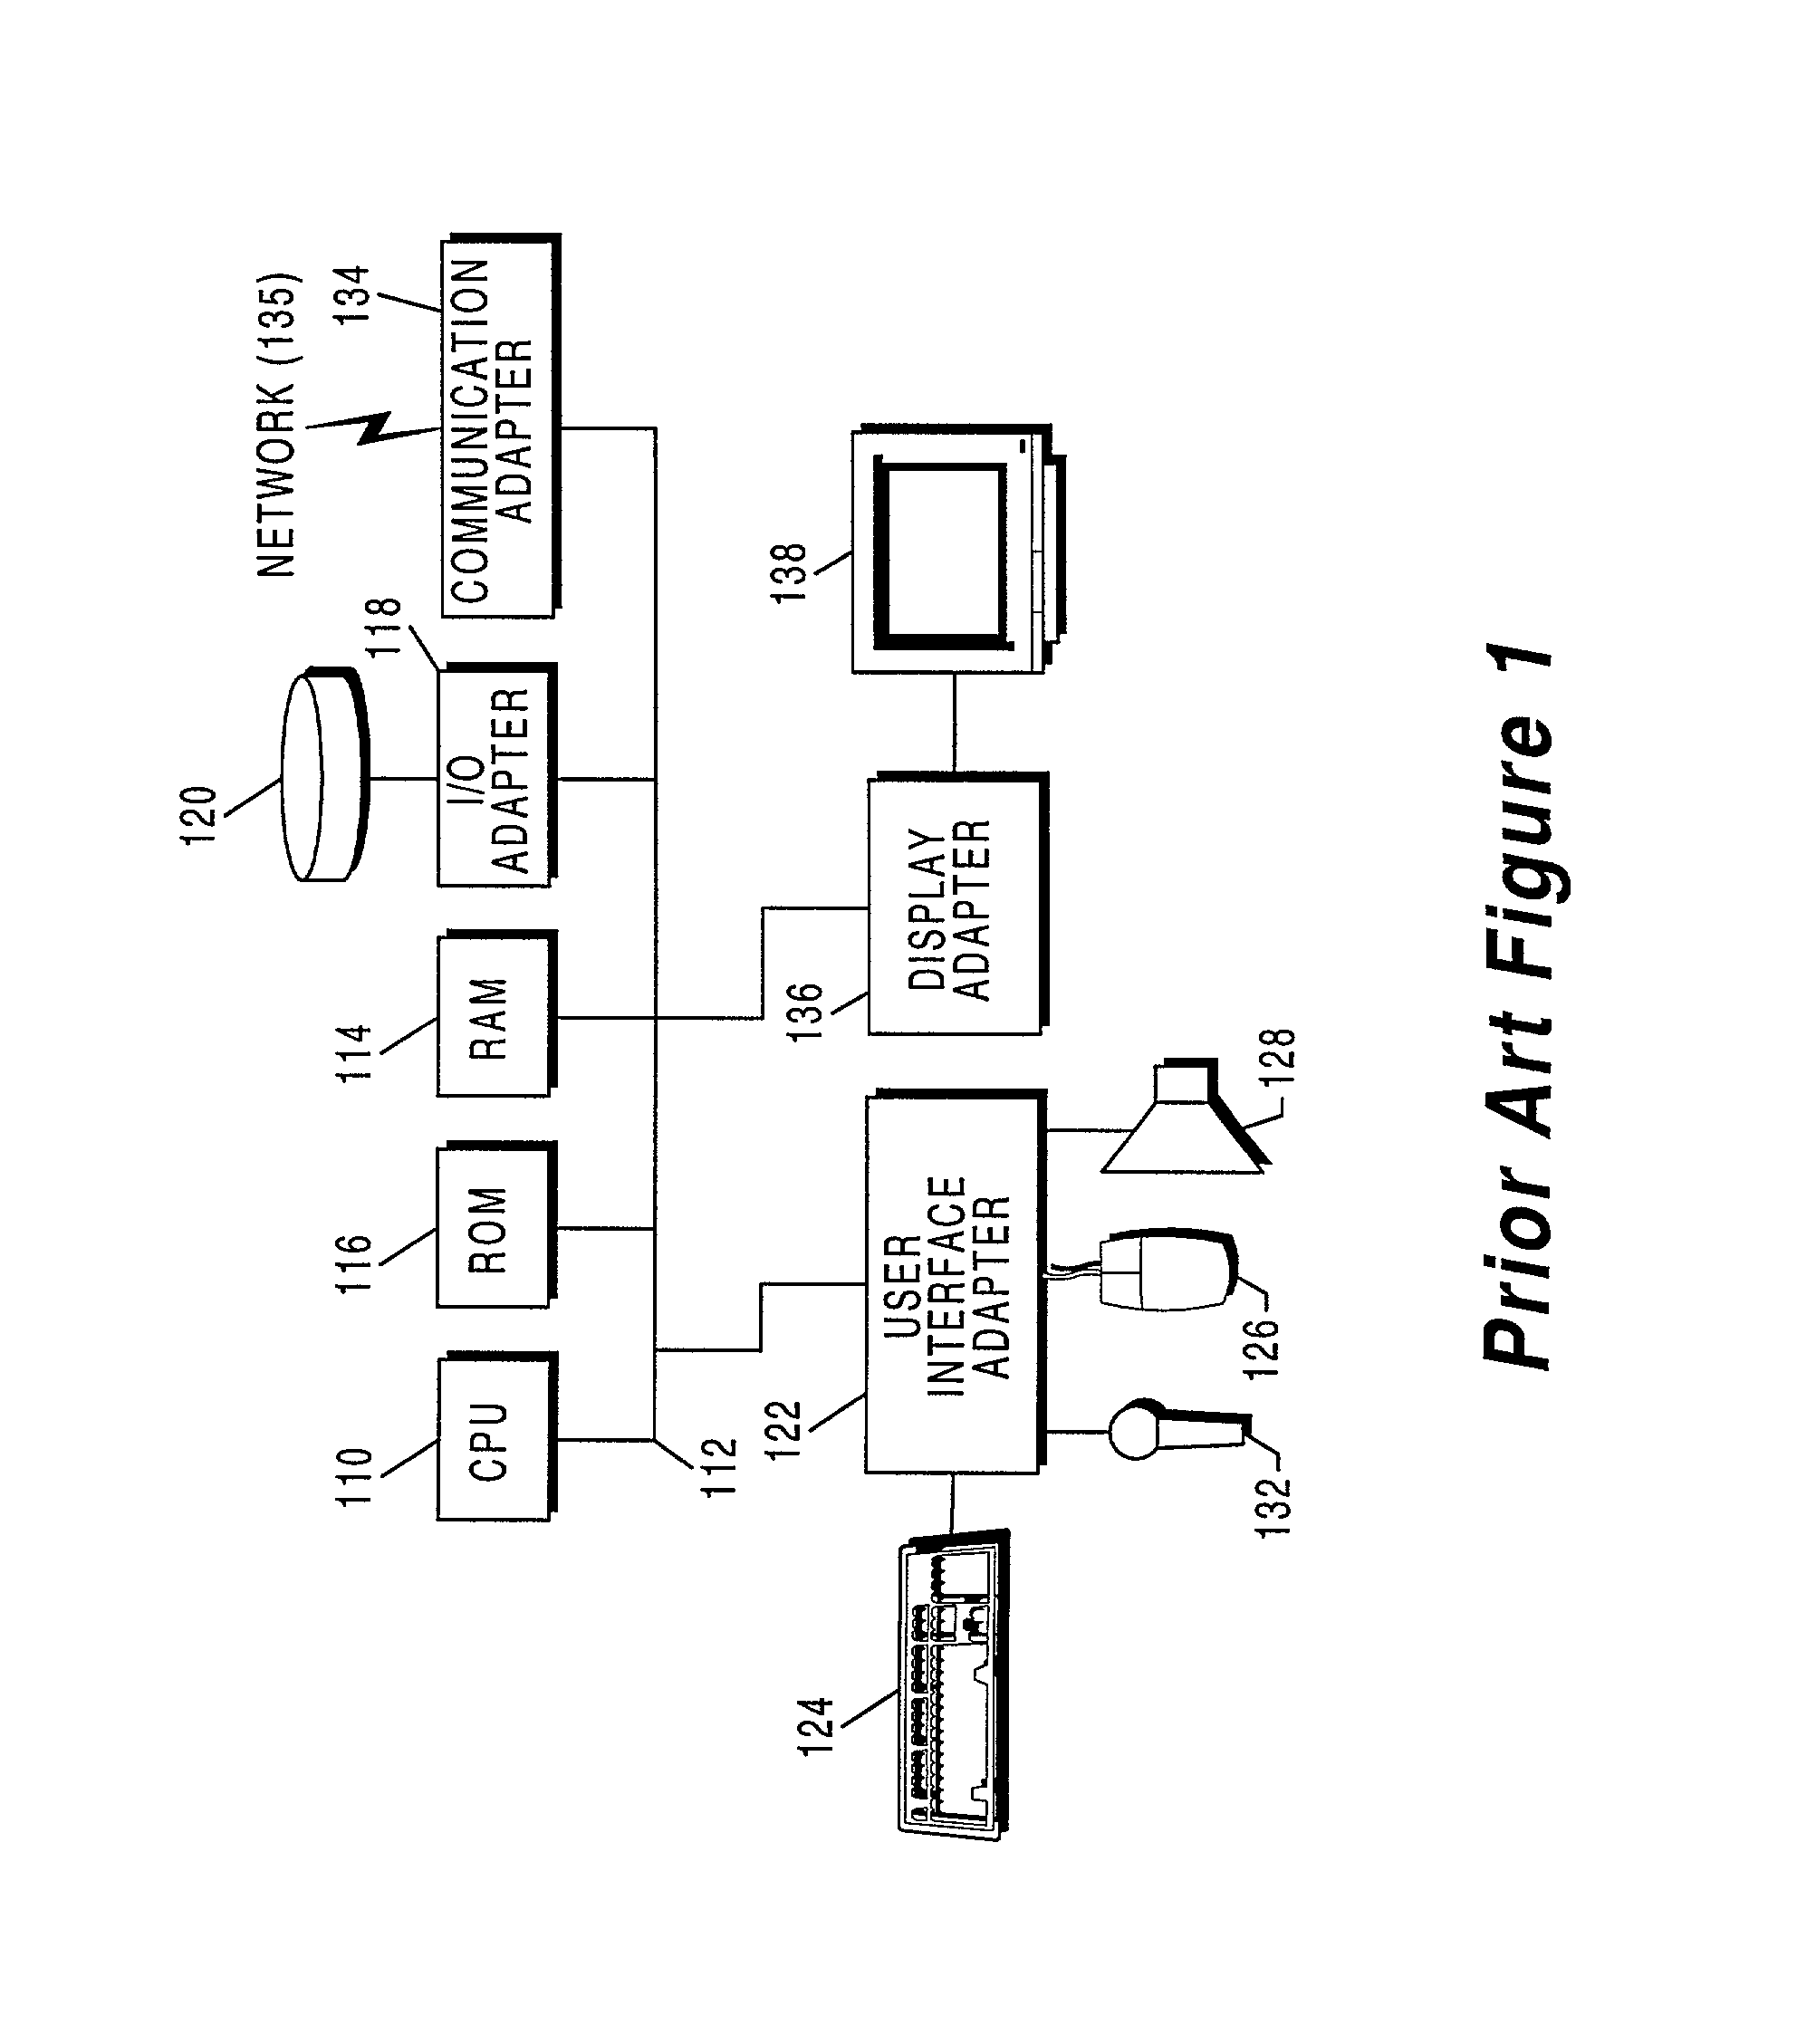 Method and article of manufacture for component based task handling during claim processing